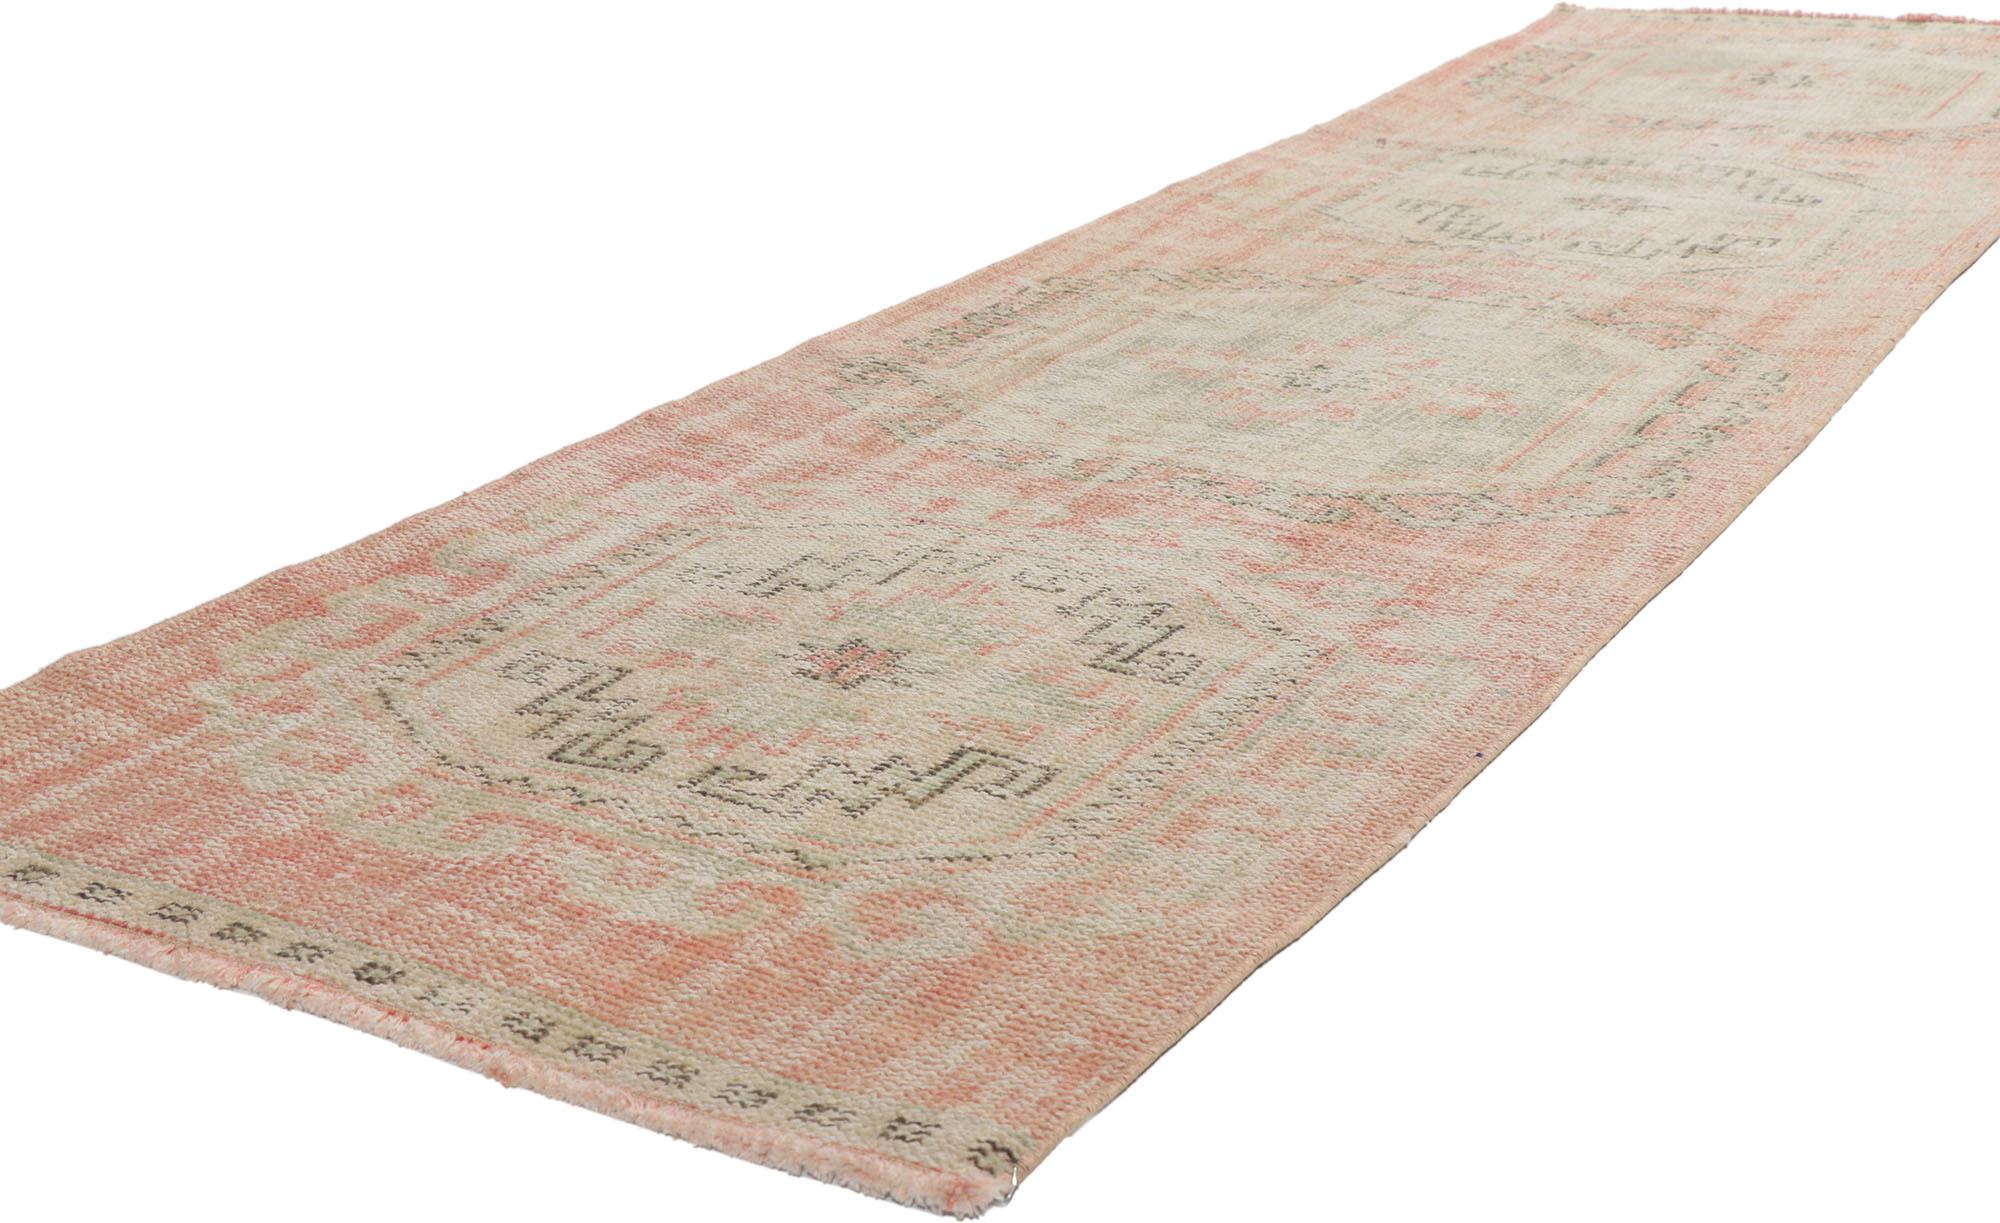 53786 Distressed Antique Turkish Oushak Rug, 02'06 x 09'00.
Weathered finesse meets global chic in this hand knotted wool distressed antique Turkish Oushak rug. Let yourself be whisked away on an enchanting journey, as you step onto this lovingly